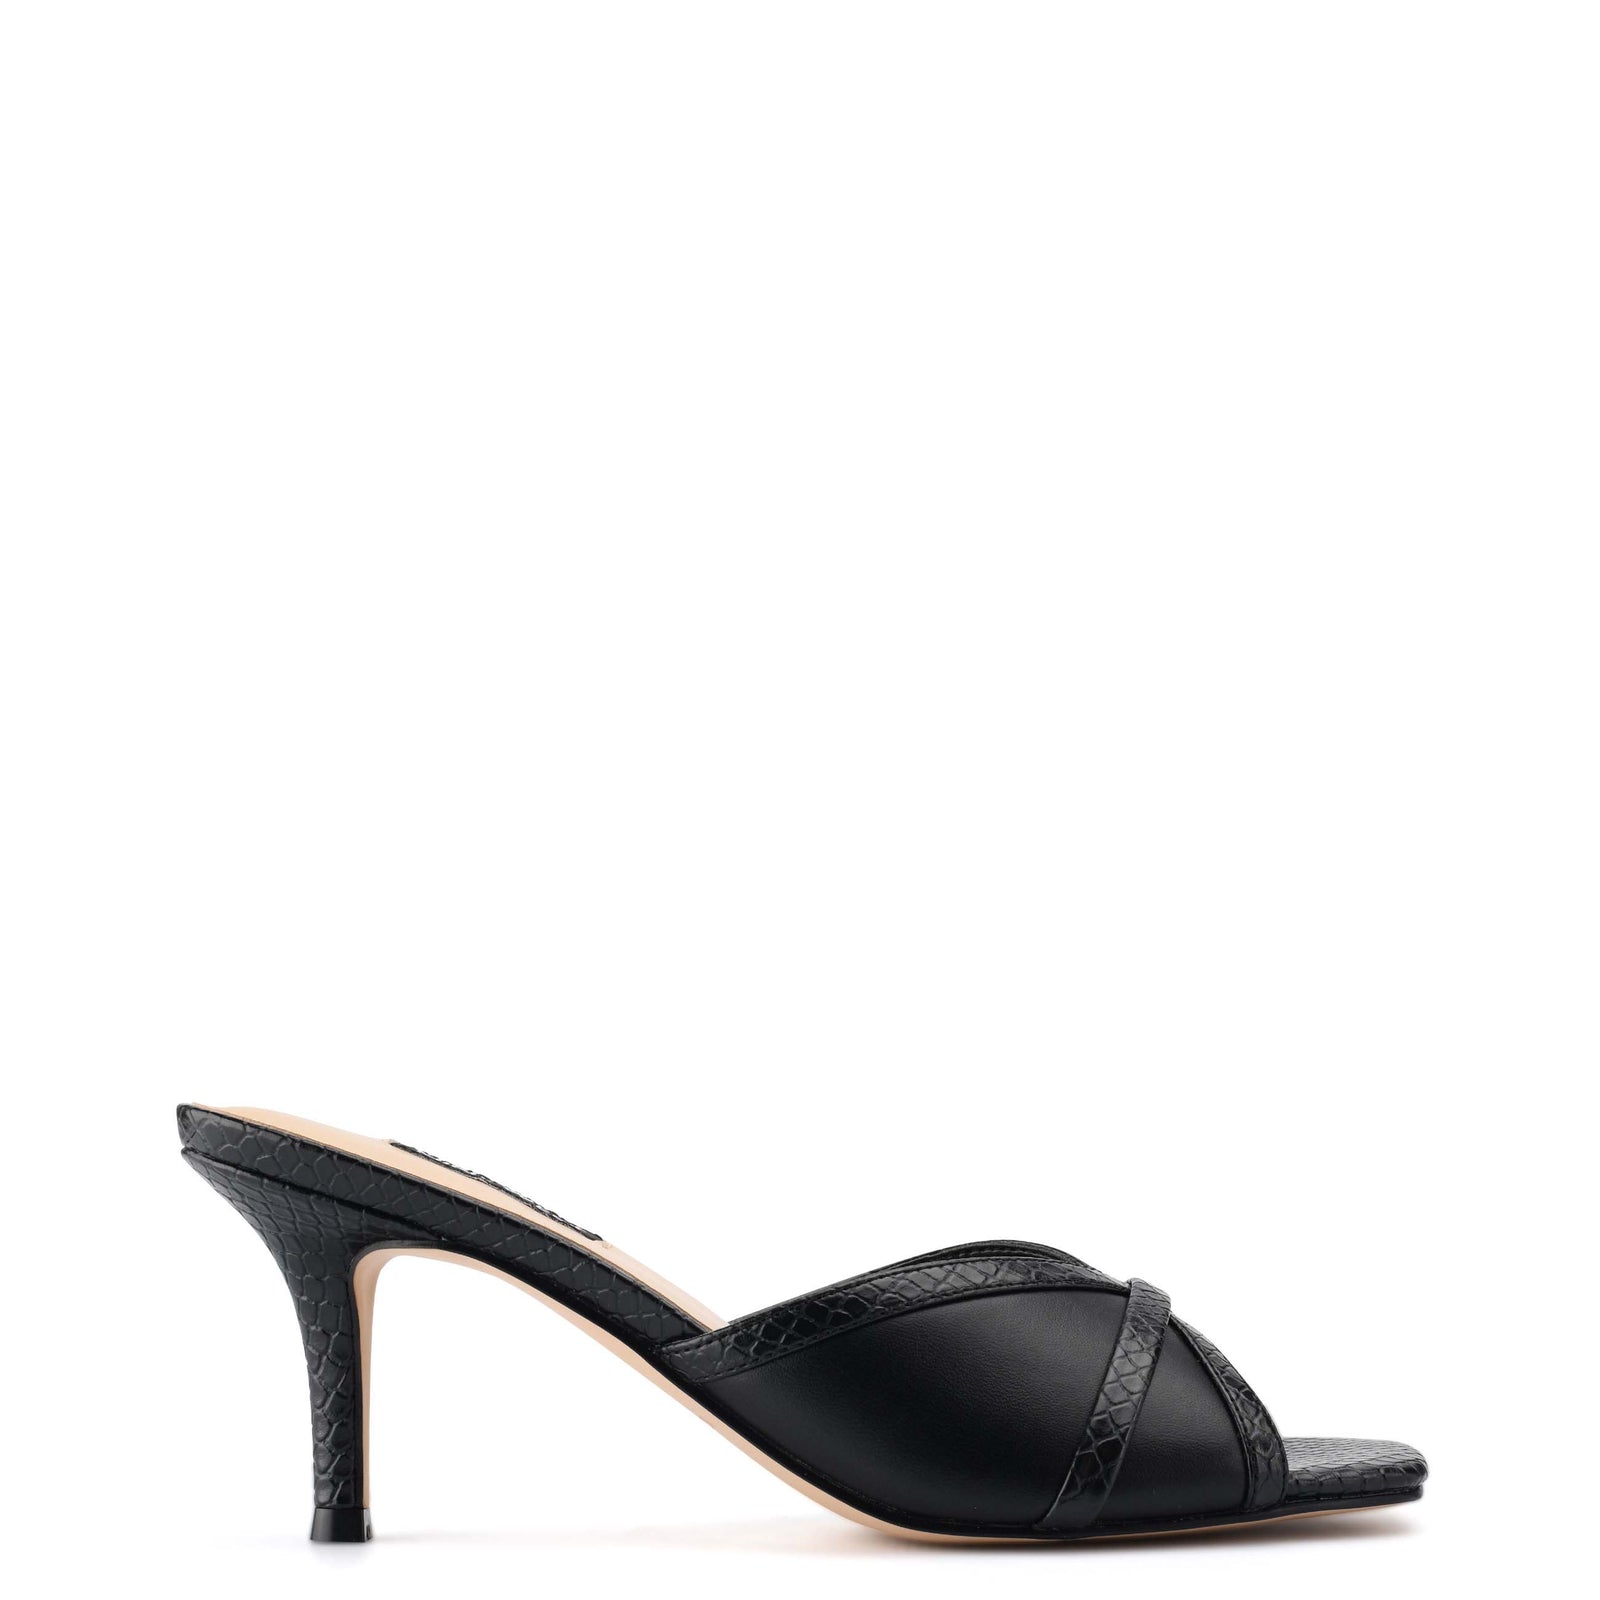 Sandals | Nine West comfortable and fashionable shoes and handbags for ...